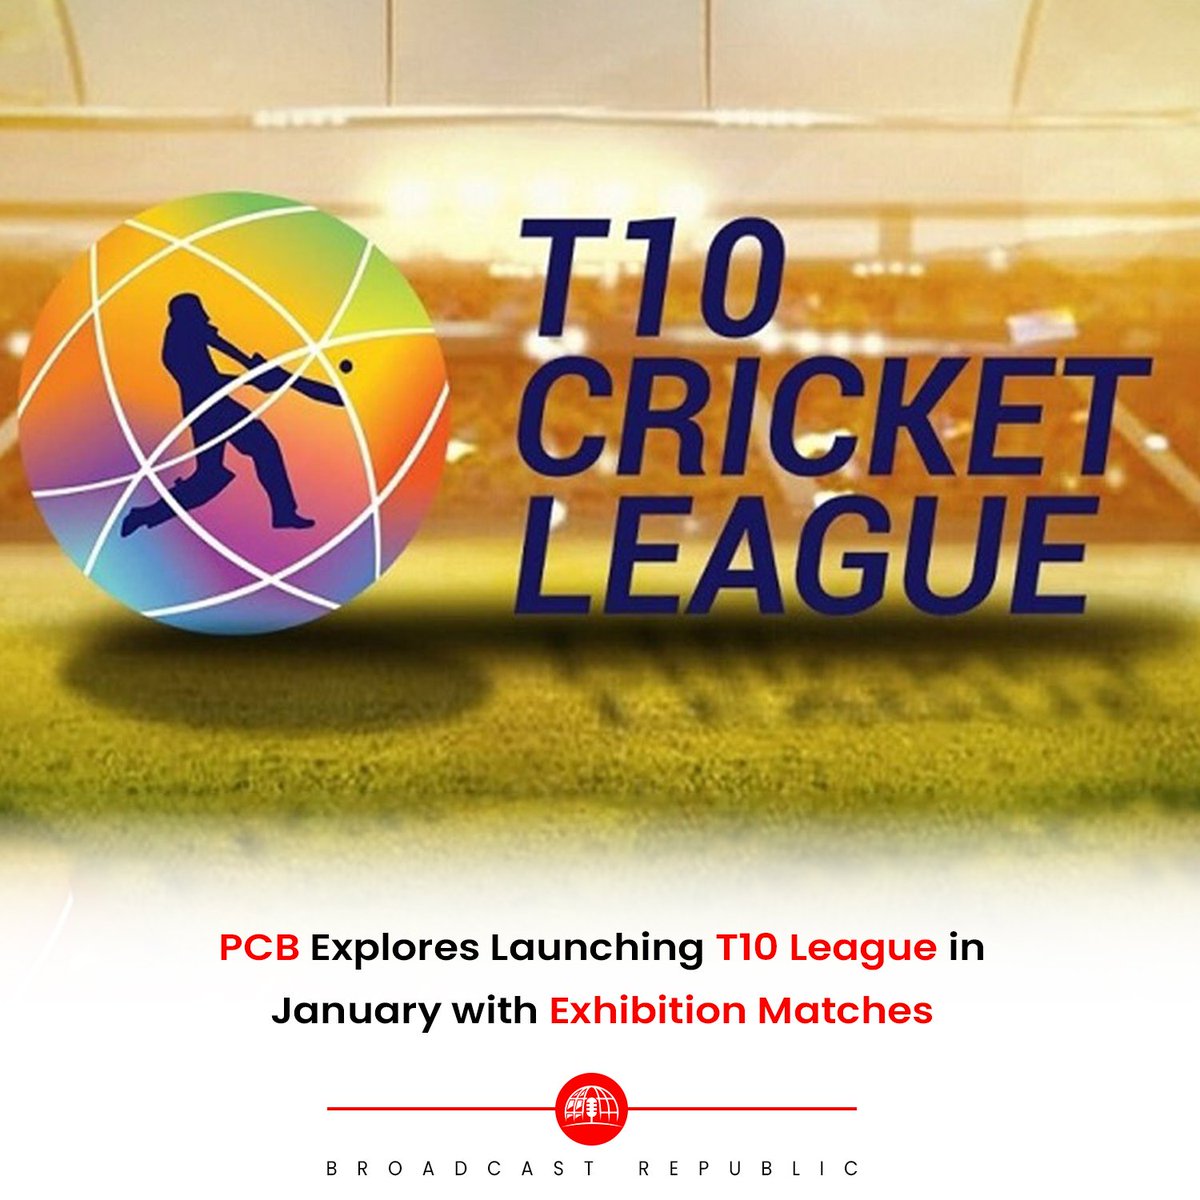 The Pakistan Cricket Board (PCB) is actively pursuing the launch of a comprehensive T10 League, with plans to host six exhibition matches in Rawalpindi next month. 

#BroadcastRepublic #PCB #T10League #CricketInPakistan